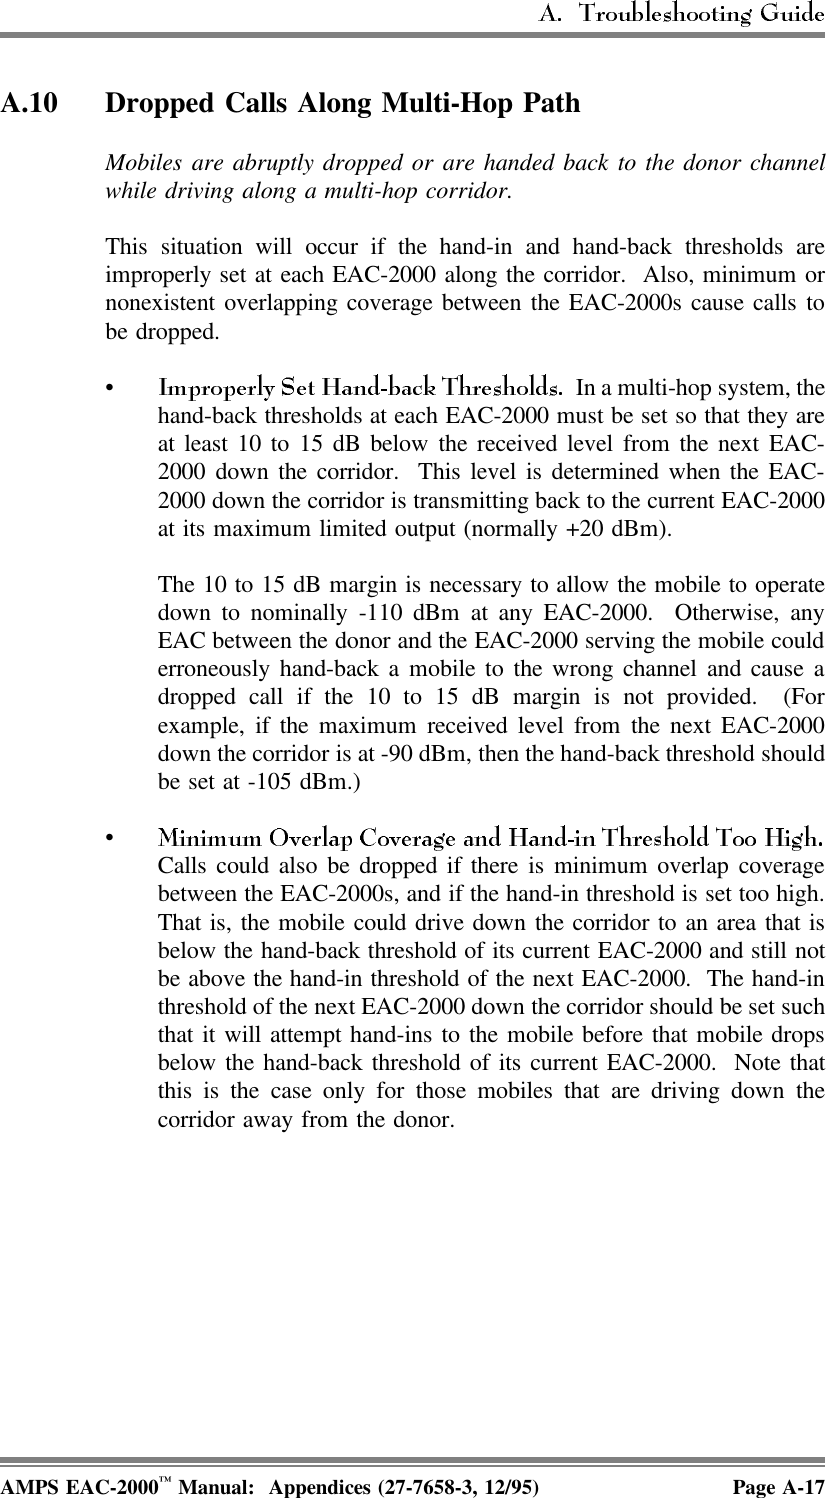 A.10 Dropped Calls Along Multi-Hop PathMobiles are abruptly dropped or are handed back to the donor channelwhile driving along a multi-hop corridor.This situation will occur if the hand-in and hand-back thresholds areimproperly set at each EAC-2000 along the corridor.  Also, minimum ornonexistent overlapping coverage between the EAC-2000s cause calls tobe dropped.•  In a multi-hop system, thehand-back thresholds at each EAC-2000 must be set so that they areat least 10 to 15 dB below the received level from the next EAC-2000 down the corridor.  This level is determined when the EAC-2000 down the corridor is transmitting back to the current EAC-2000at its maximum limited output (normally +20 dBm). The 10 to 15 dB margin is necessary to allow the mobile to operatedown to nominally -110 dBm at any EAC-2000.  Otherwise, anyEAC between the donor and the EAC-2000 serving the mobile coulderroneously hand-back a mobile to the wrong channel and cause adropped call if the 10 to 15 dB margin is not provided.  (Forexample, if the maximum received level from the next EAC-2000down the corridor is at -90 dBm, then the hand-back threshold shouldbe set at -105 dBm.)•Calls could also be dropped if there is minimum overlap coveragebetween the EAC-2000s, and if the hand-in threshold is set too high.That is, the mobile could drive down the corridor to an area that isbelow the hand-back threshold of its current EAC-2000 and still notbe above the hand-in threshold of the next EAC-2000.  The hand-inthreshold of the next EAC-2000 down the corridor should be set suchthat it will attempt hand-ins to the mobile before that mobile dropsbelow the hand-back threshold of its current EAC-2000.  Note thatthis is the case only for those mobiles that are driving down thecorridor away from the donor.AMPS EAC-2000™ Manual:  Appendices (27-7658-3, 12/95) Page A-17